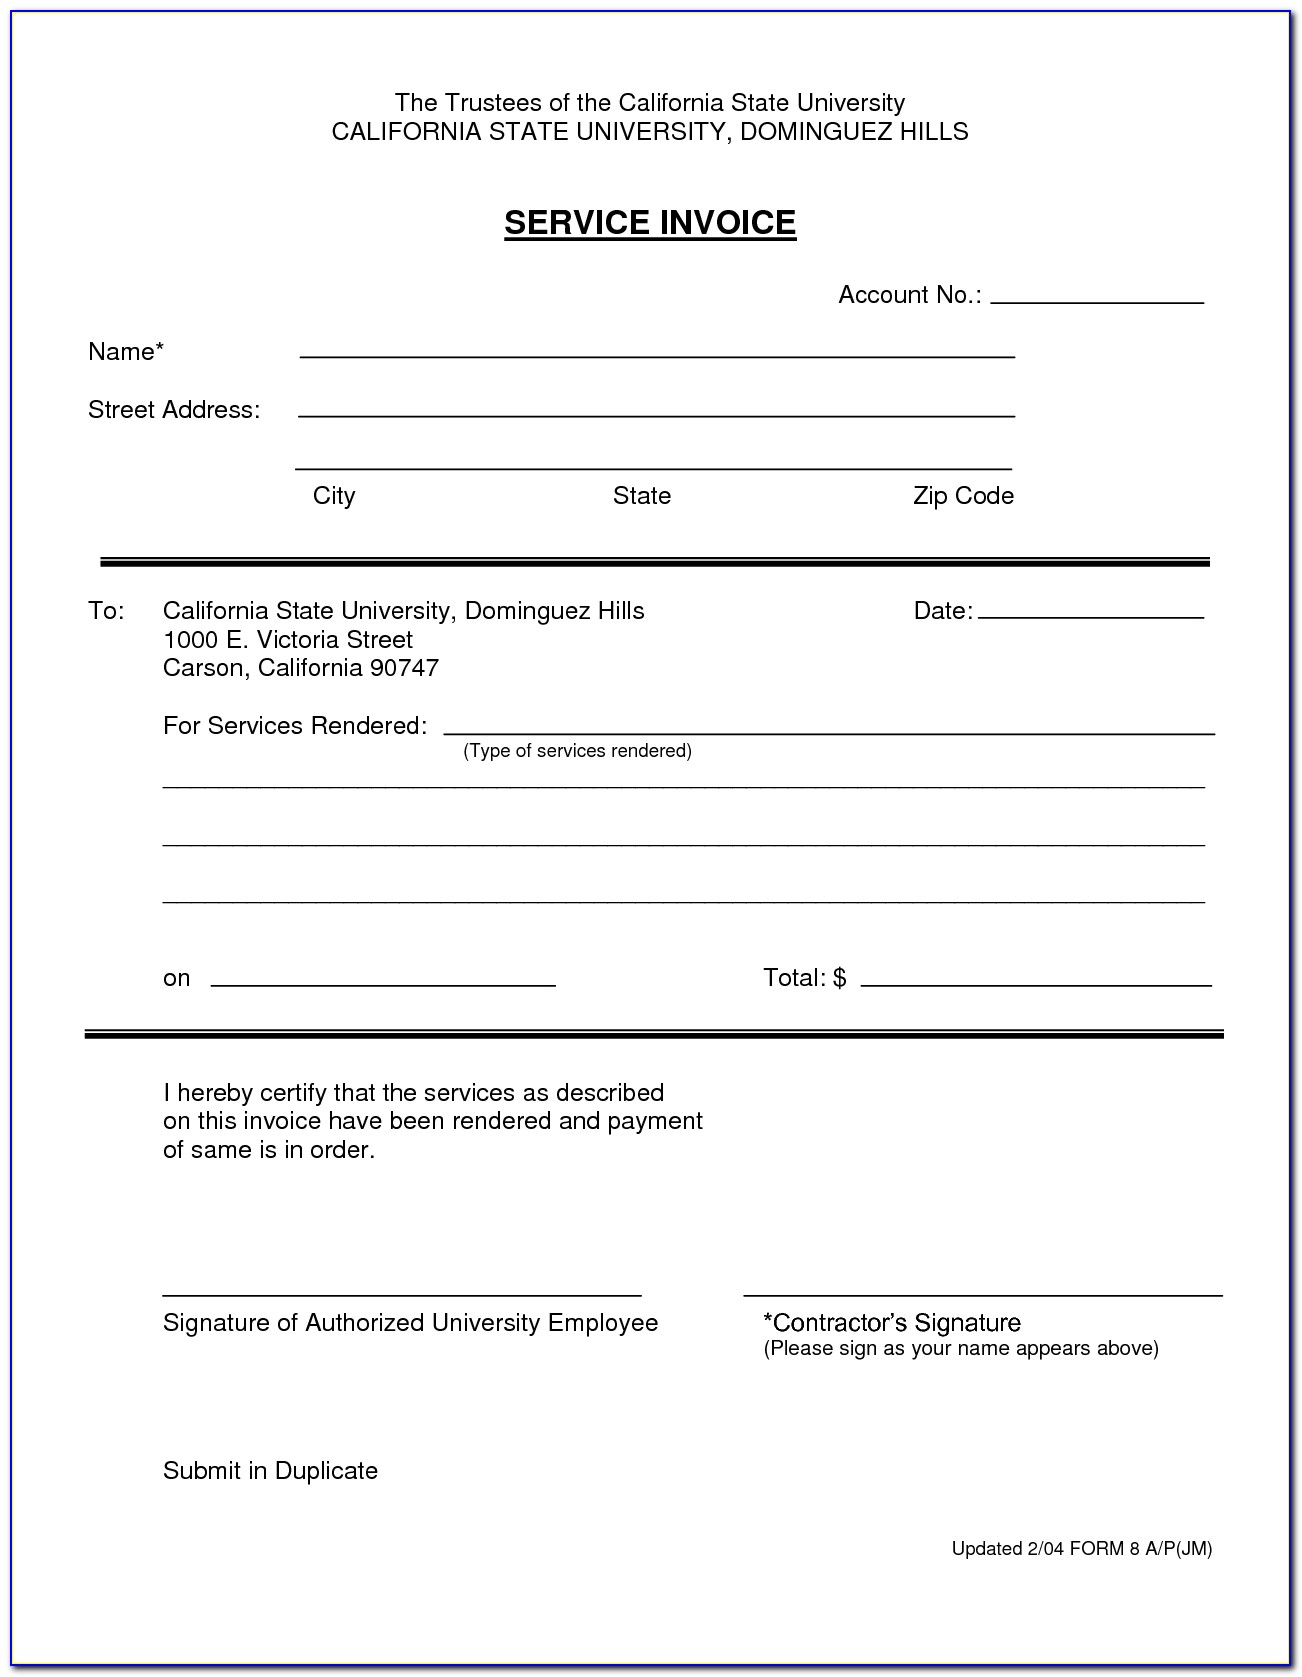 Invoice For Services Rendered Template 001 Resume Templates Sample Invoices For Services Rendered